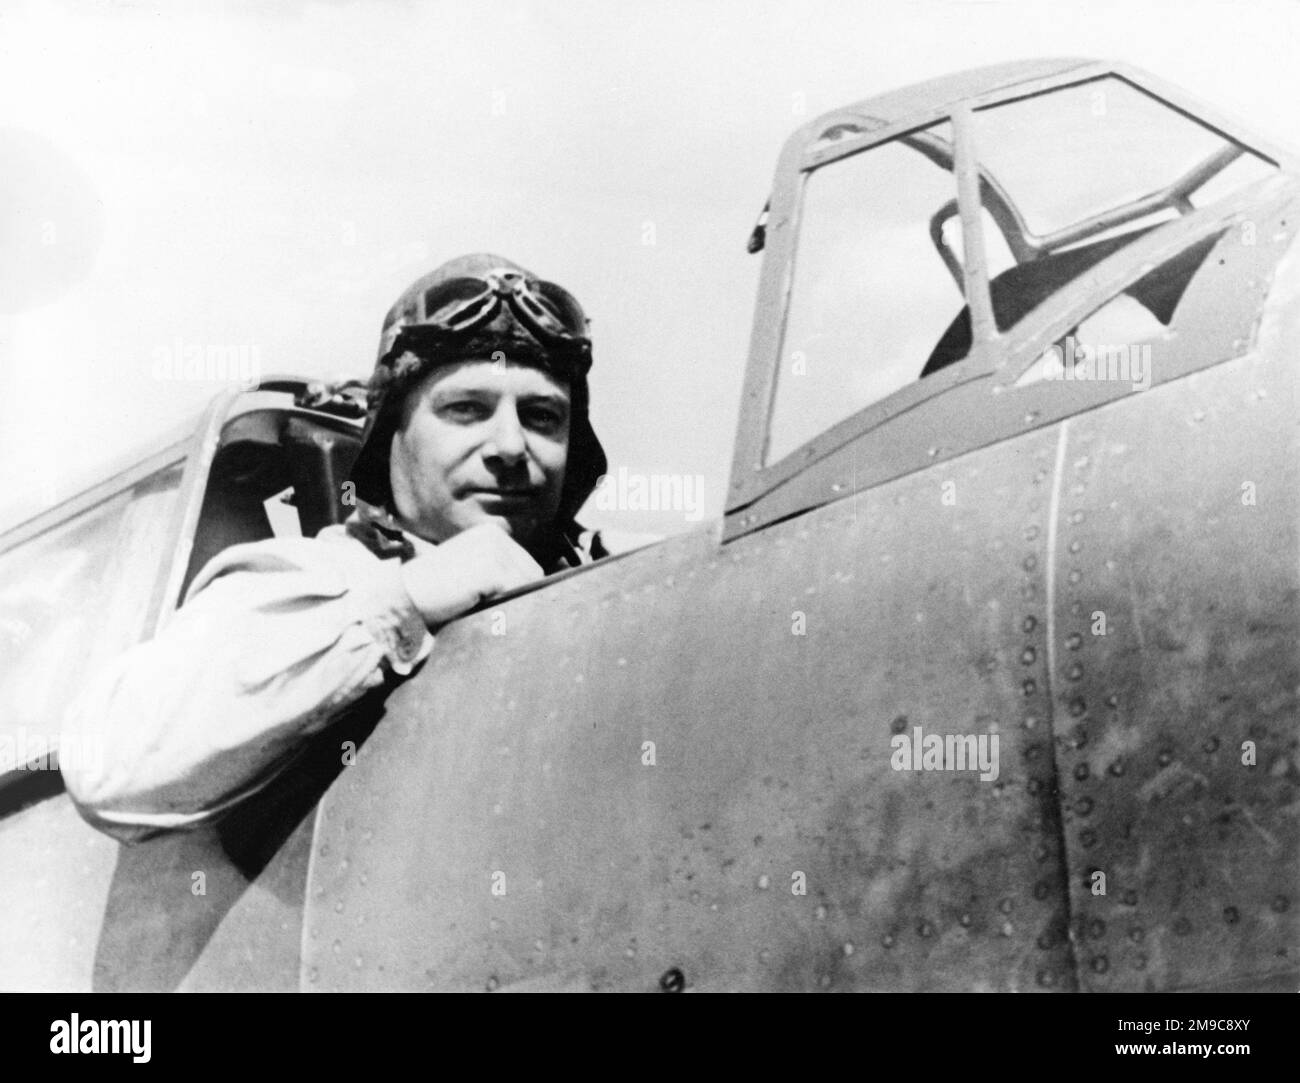 General Ernst Udet sat in the cockpit of Heinkel He 100 V2, after breaking the World 100km closed-circuit speed record at 634 Km/h, on 5 June 1938. Stock Photo